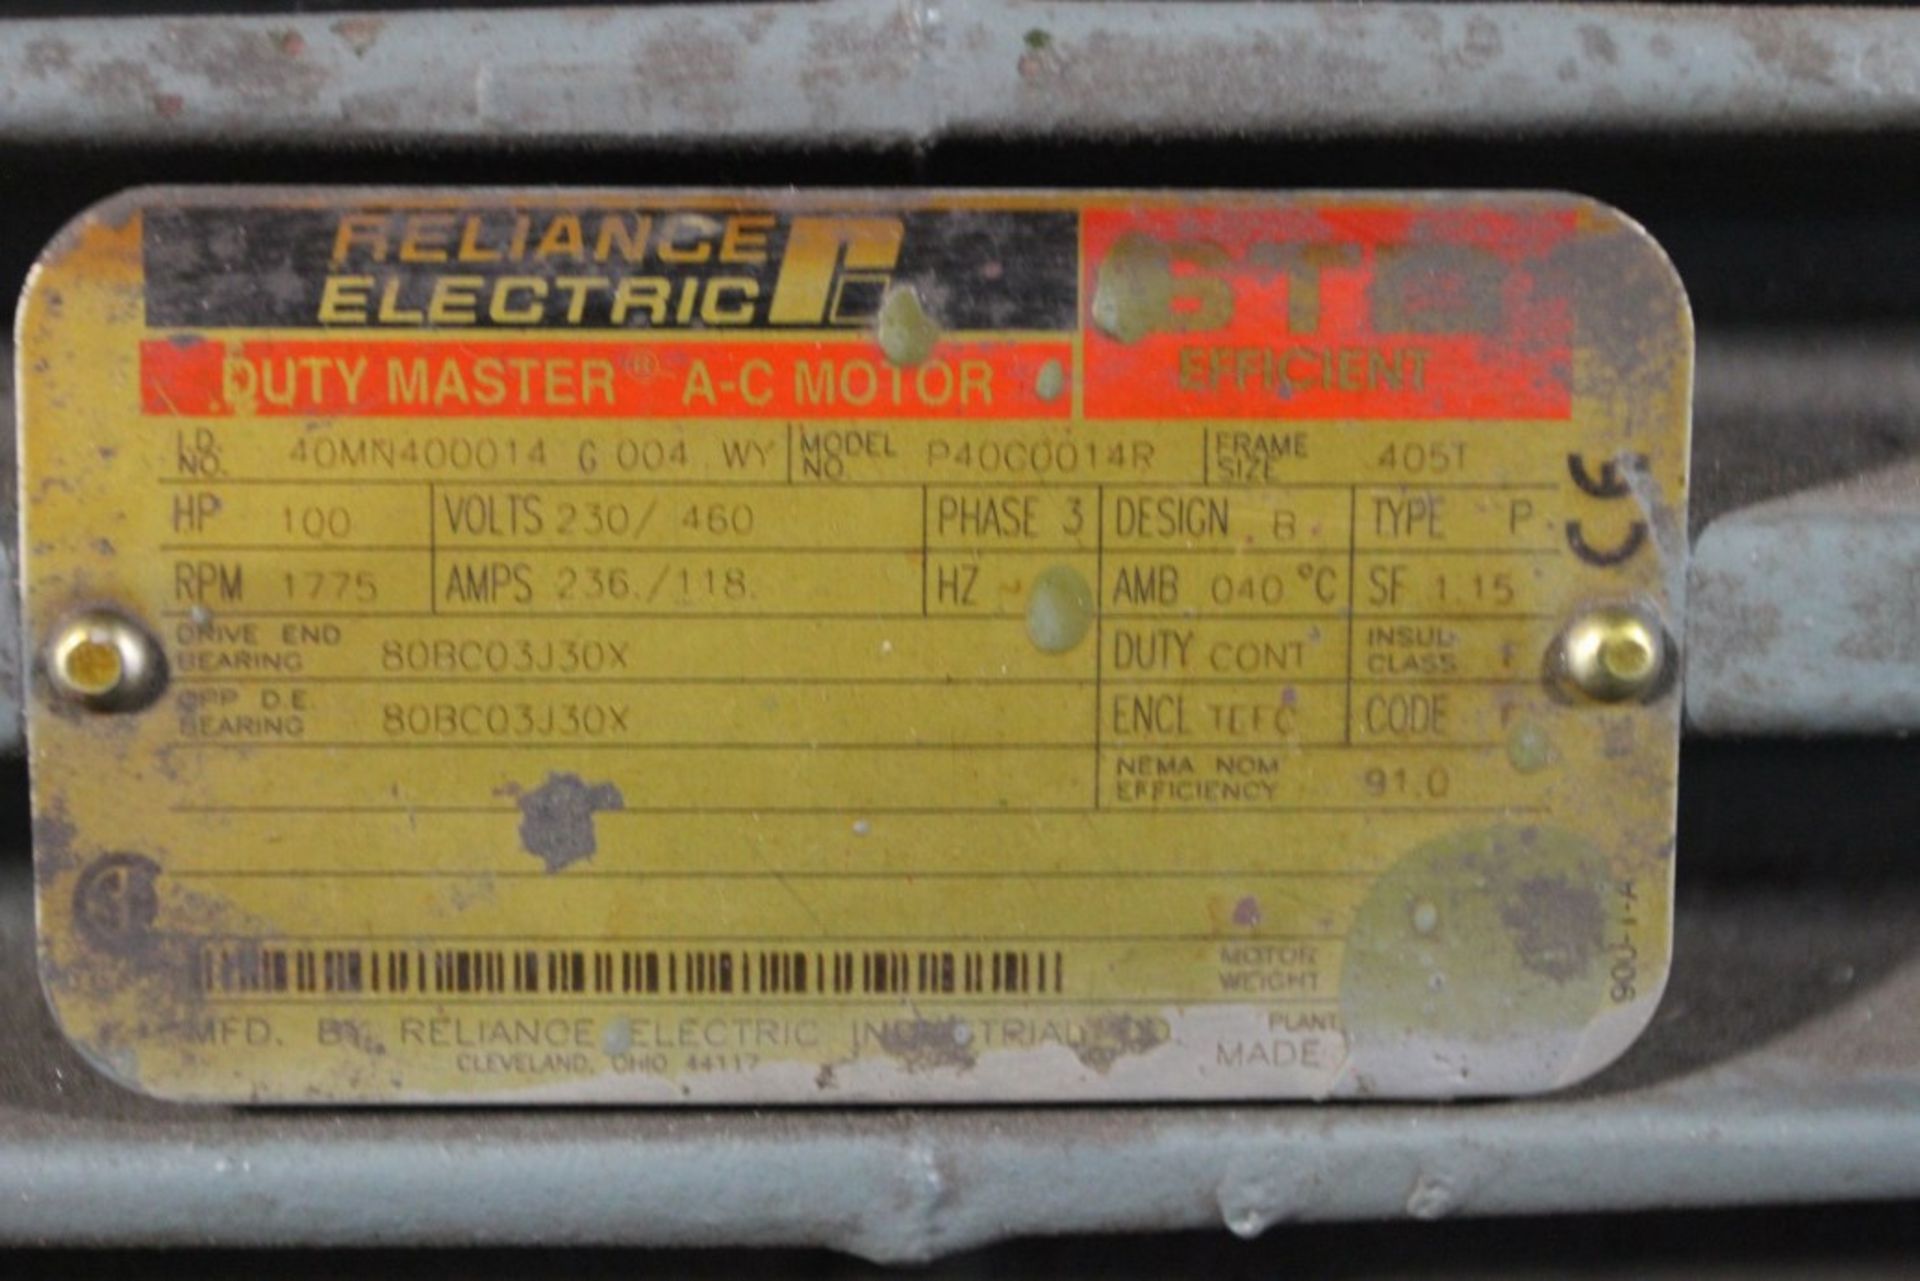 100 HP Reliance Electric Duty Master AC Motor; 23/460V; 236/118 Amp; 1775 RPM - Image 2 of 2